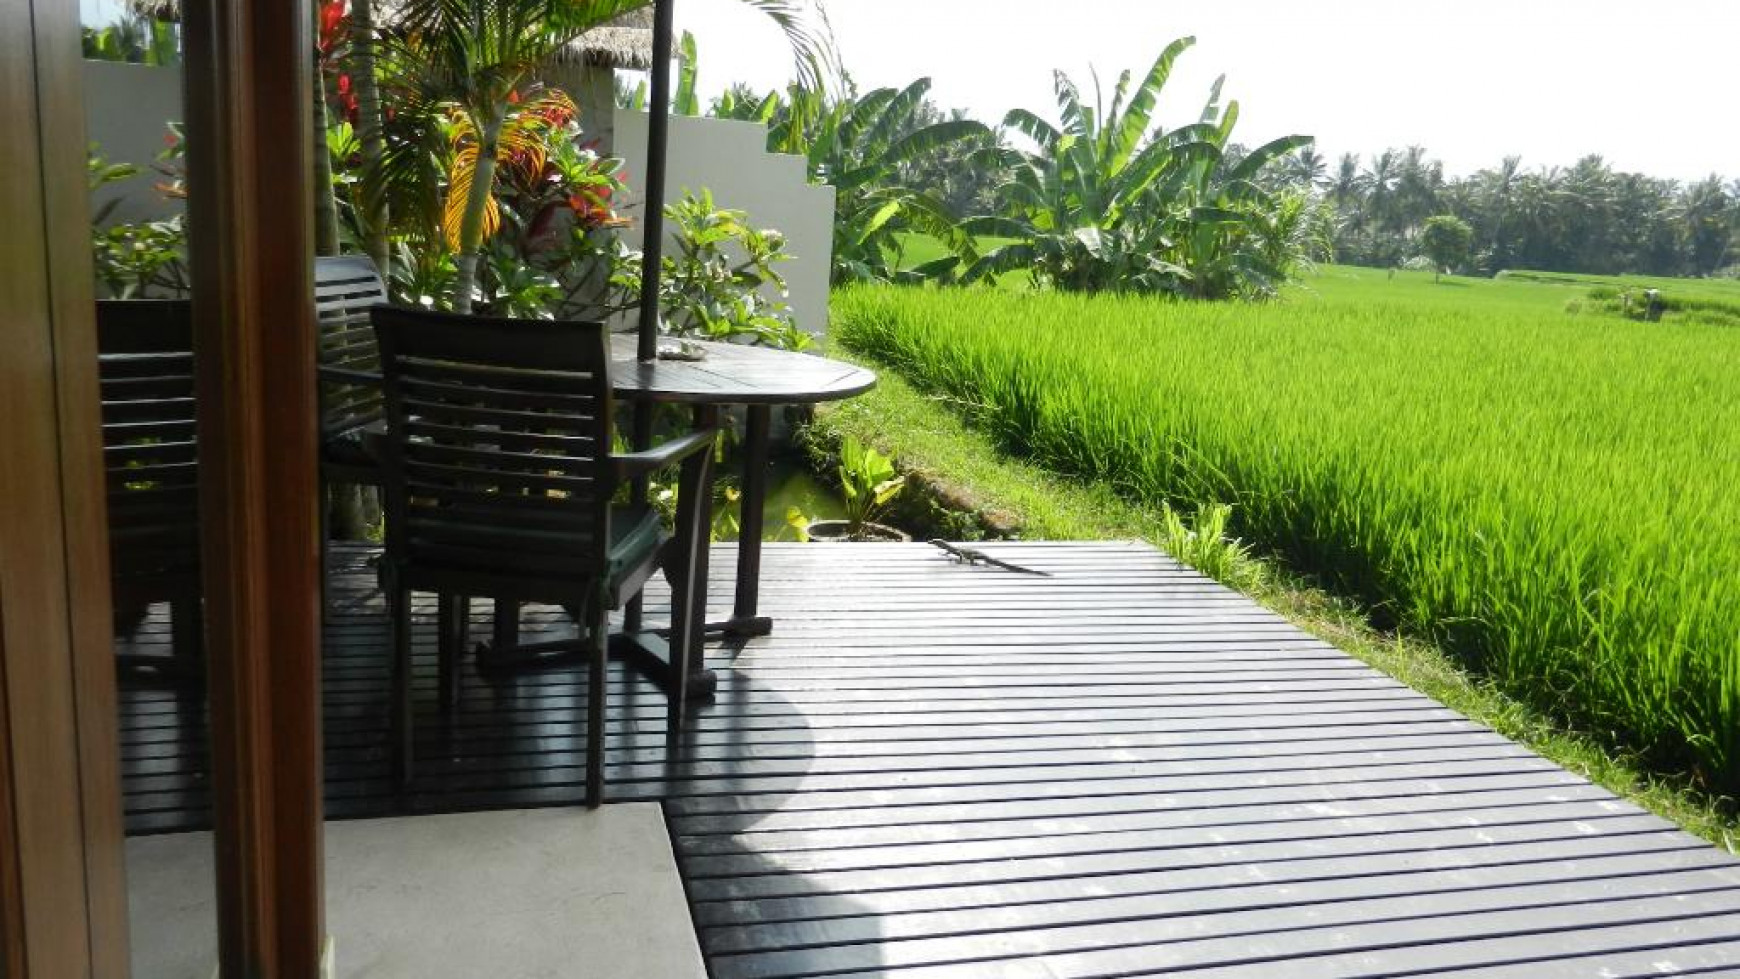 Amazing Villa Complex (5 Villas) on 1000 sq m of Freehold Land with Stunning Views 5 Minutes from the Center of Ubud